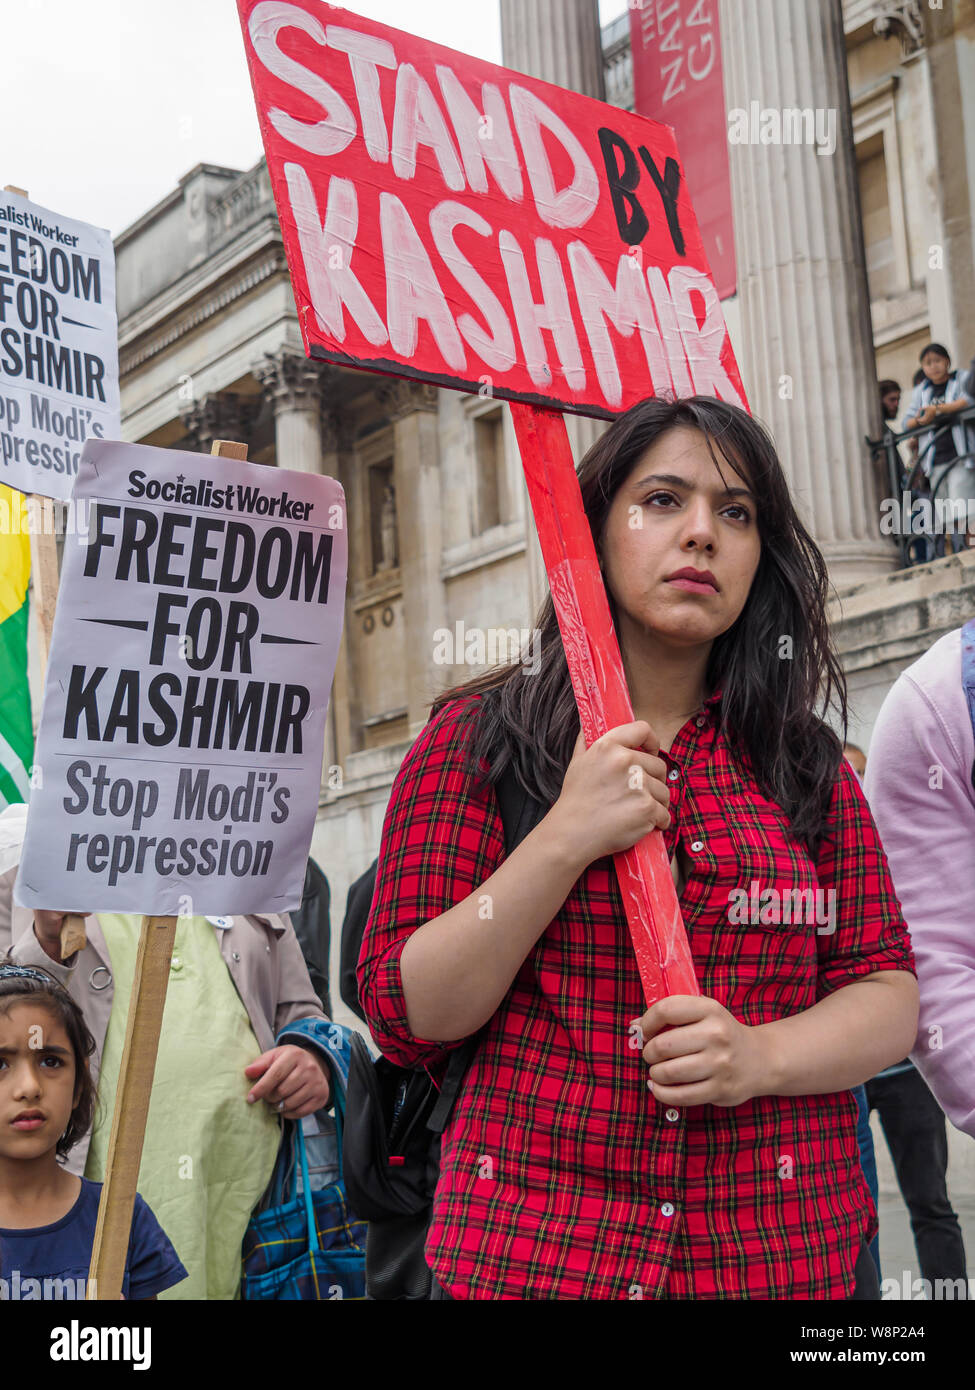 London, UK. 10th Aug, 2019. Kashmiris protest in Trafalgar Square against India's President Modi who revoked Article 370 of the Indian Constitution which guaranteed significant autonomy to the Muslim-majority state of Kashmir after the Independence partition of India and Pakistan. Kashmiris have been calling for independence, with armed revolt since 1989 suppressed by torture, deliberate blinding and killings by a huge Indian occupying force. They call Modi a Hindu fascist who has united the country against India.Peter Marshall/Alamy Live News Credit: Peter Marshall/Alamy Live News Stock Photo